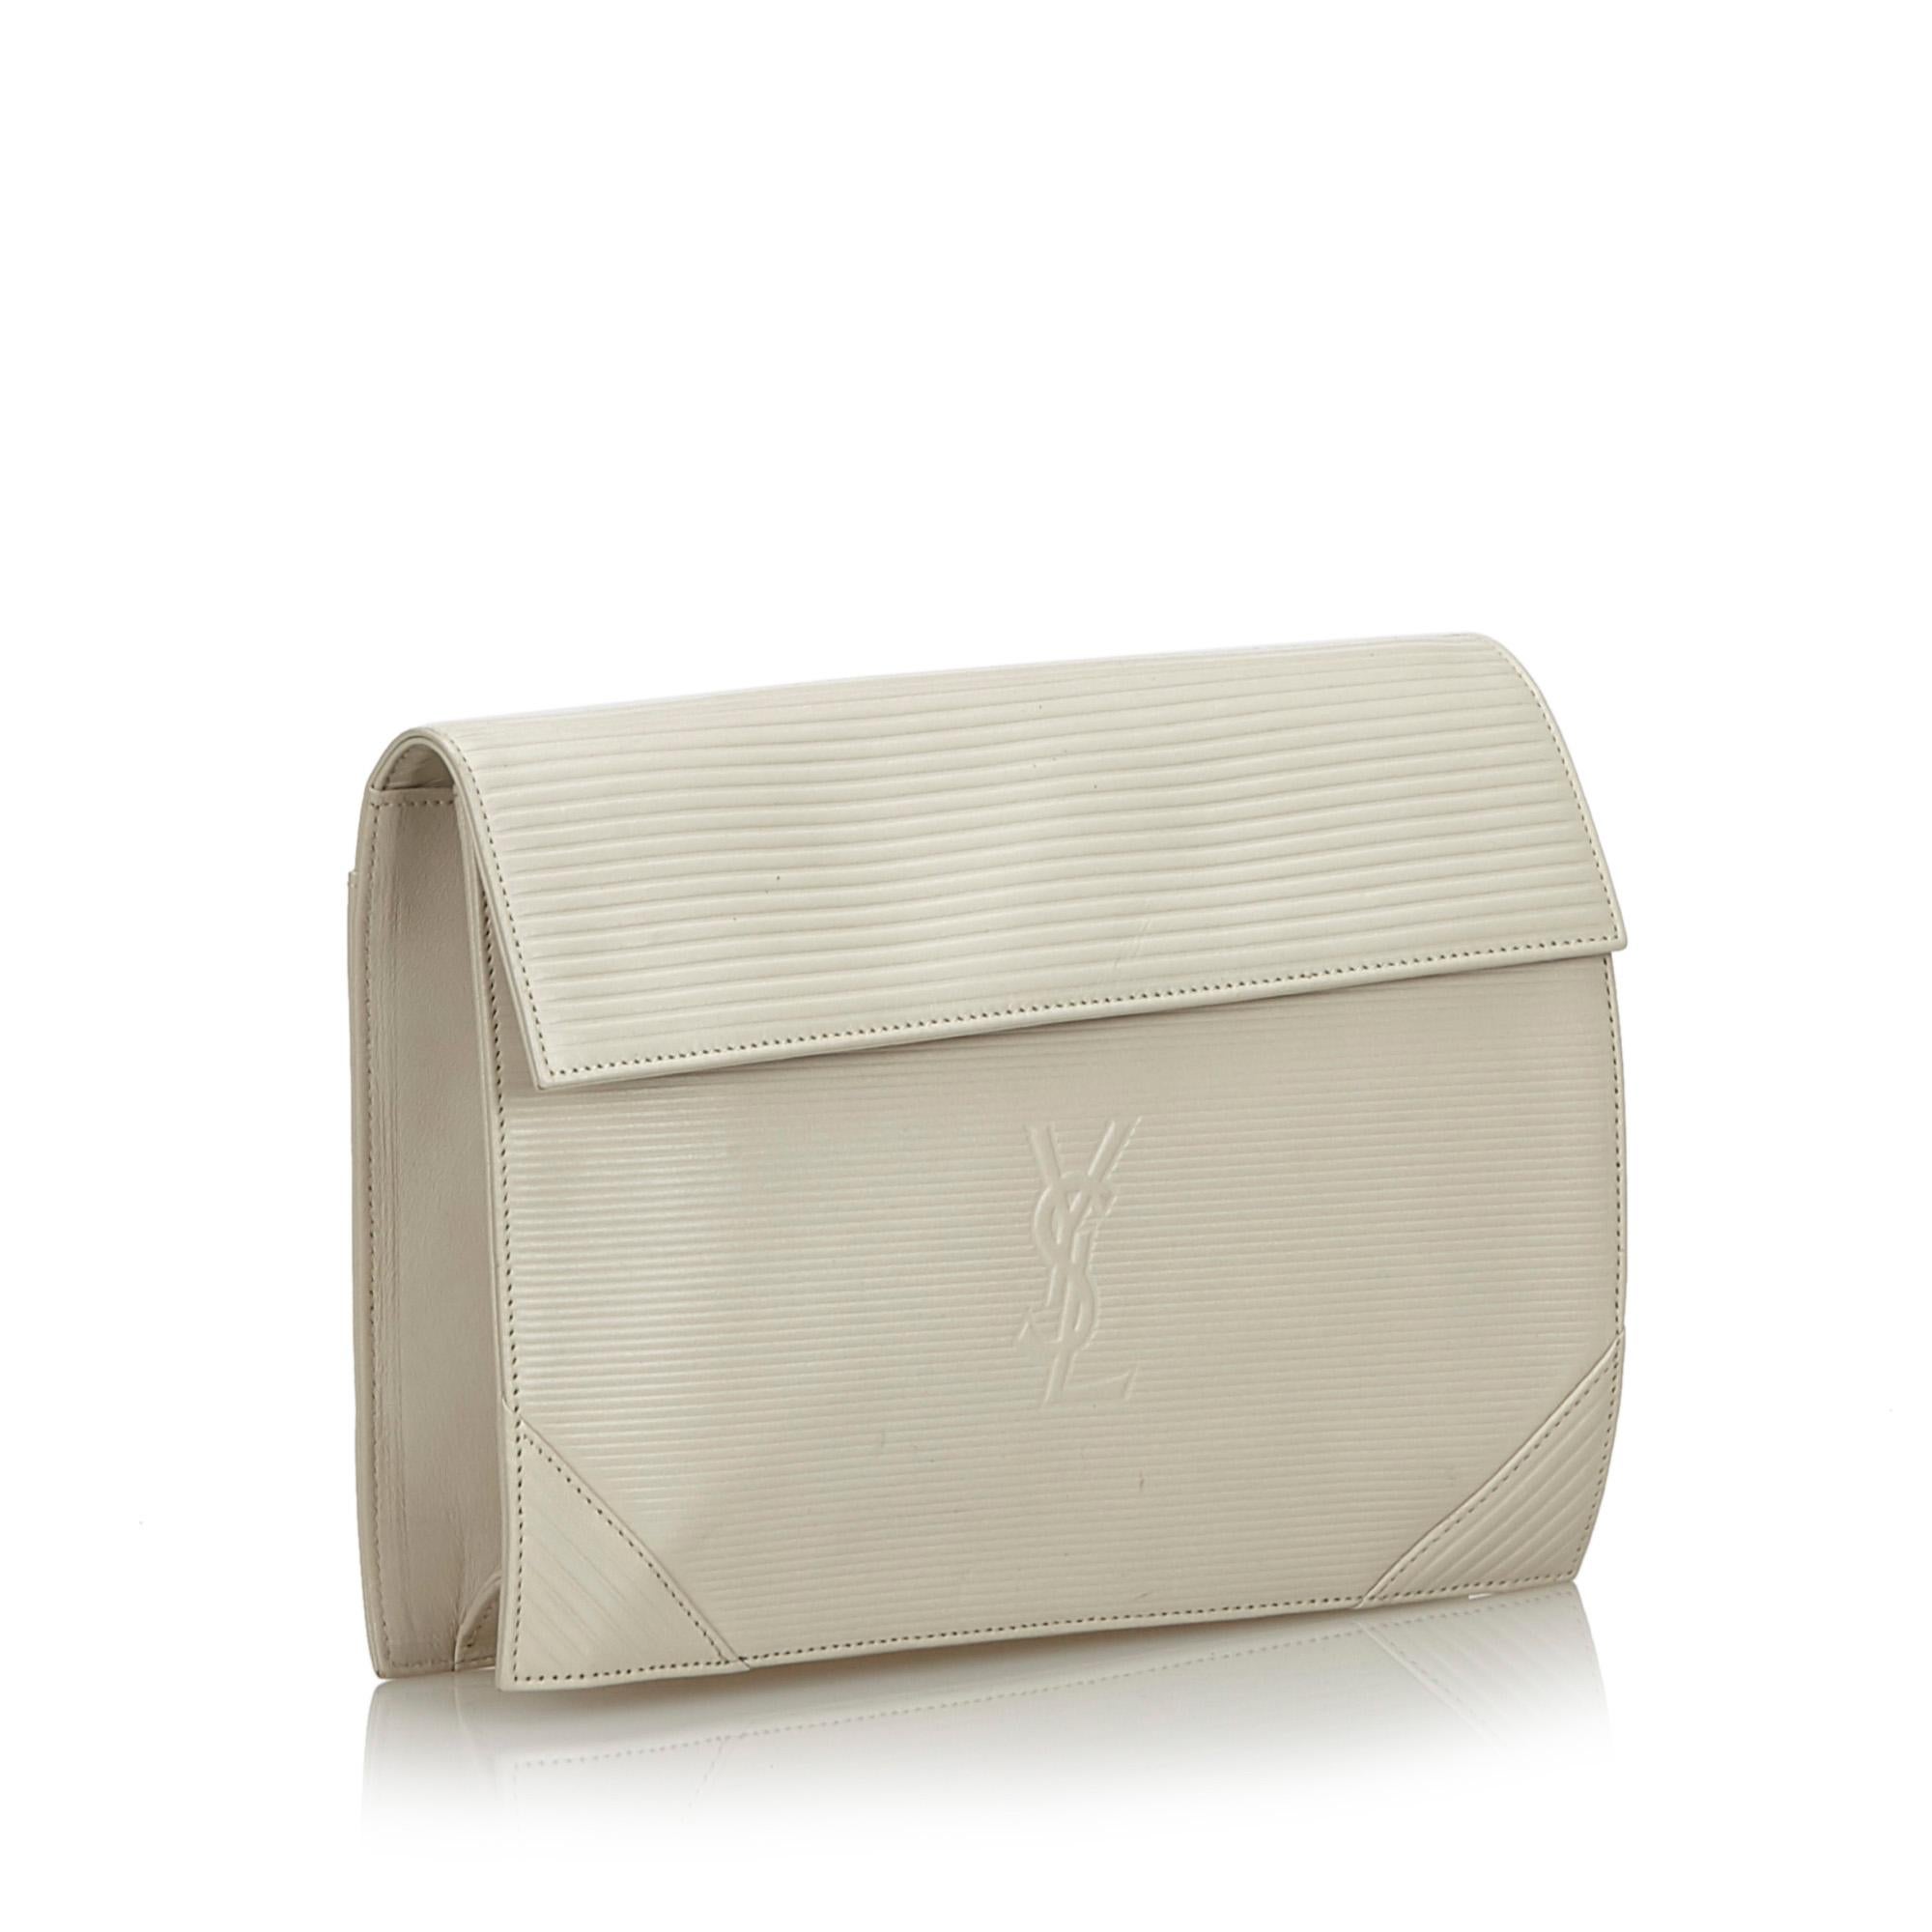 This clutch bag features a leather body, a top flap with magnetic snap button closure, and an interior zip pocket. It carries as B+ condition rating.

Inclusions: 
This item does not come with inclusions.

Dimensions:
Length: 18.00 cm
Width: 24.00